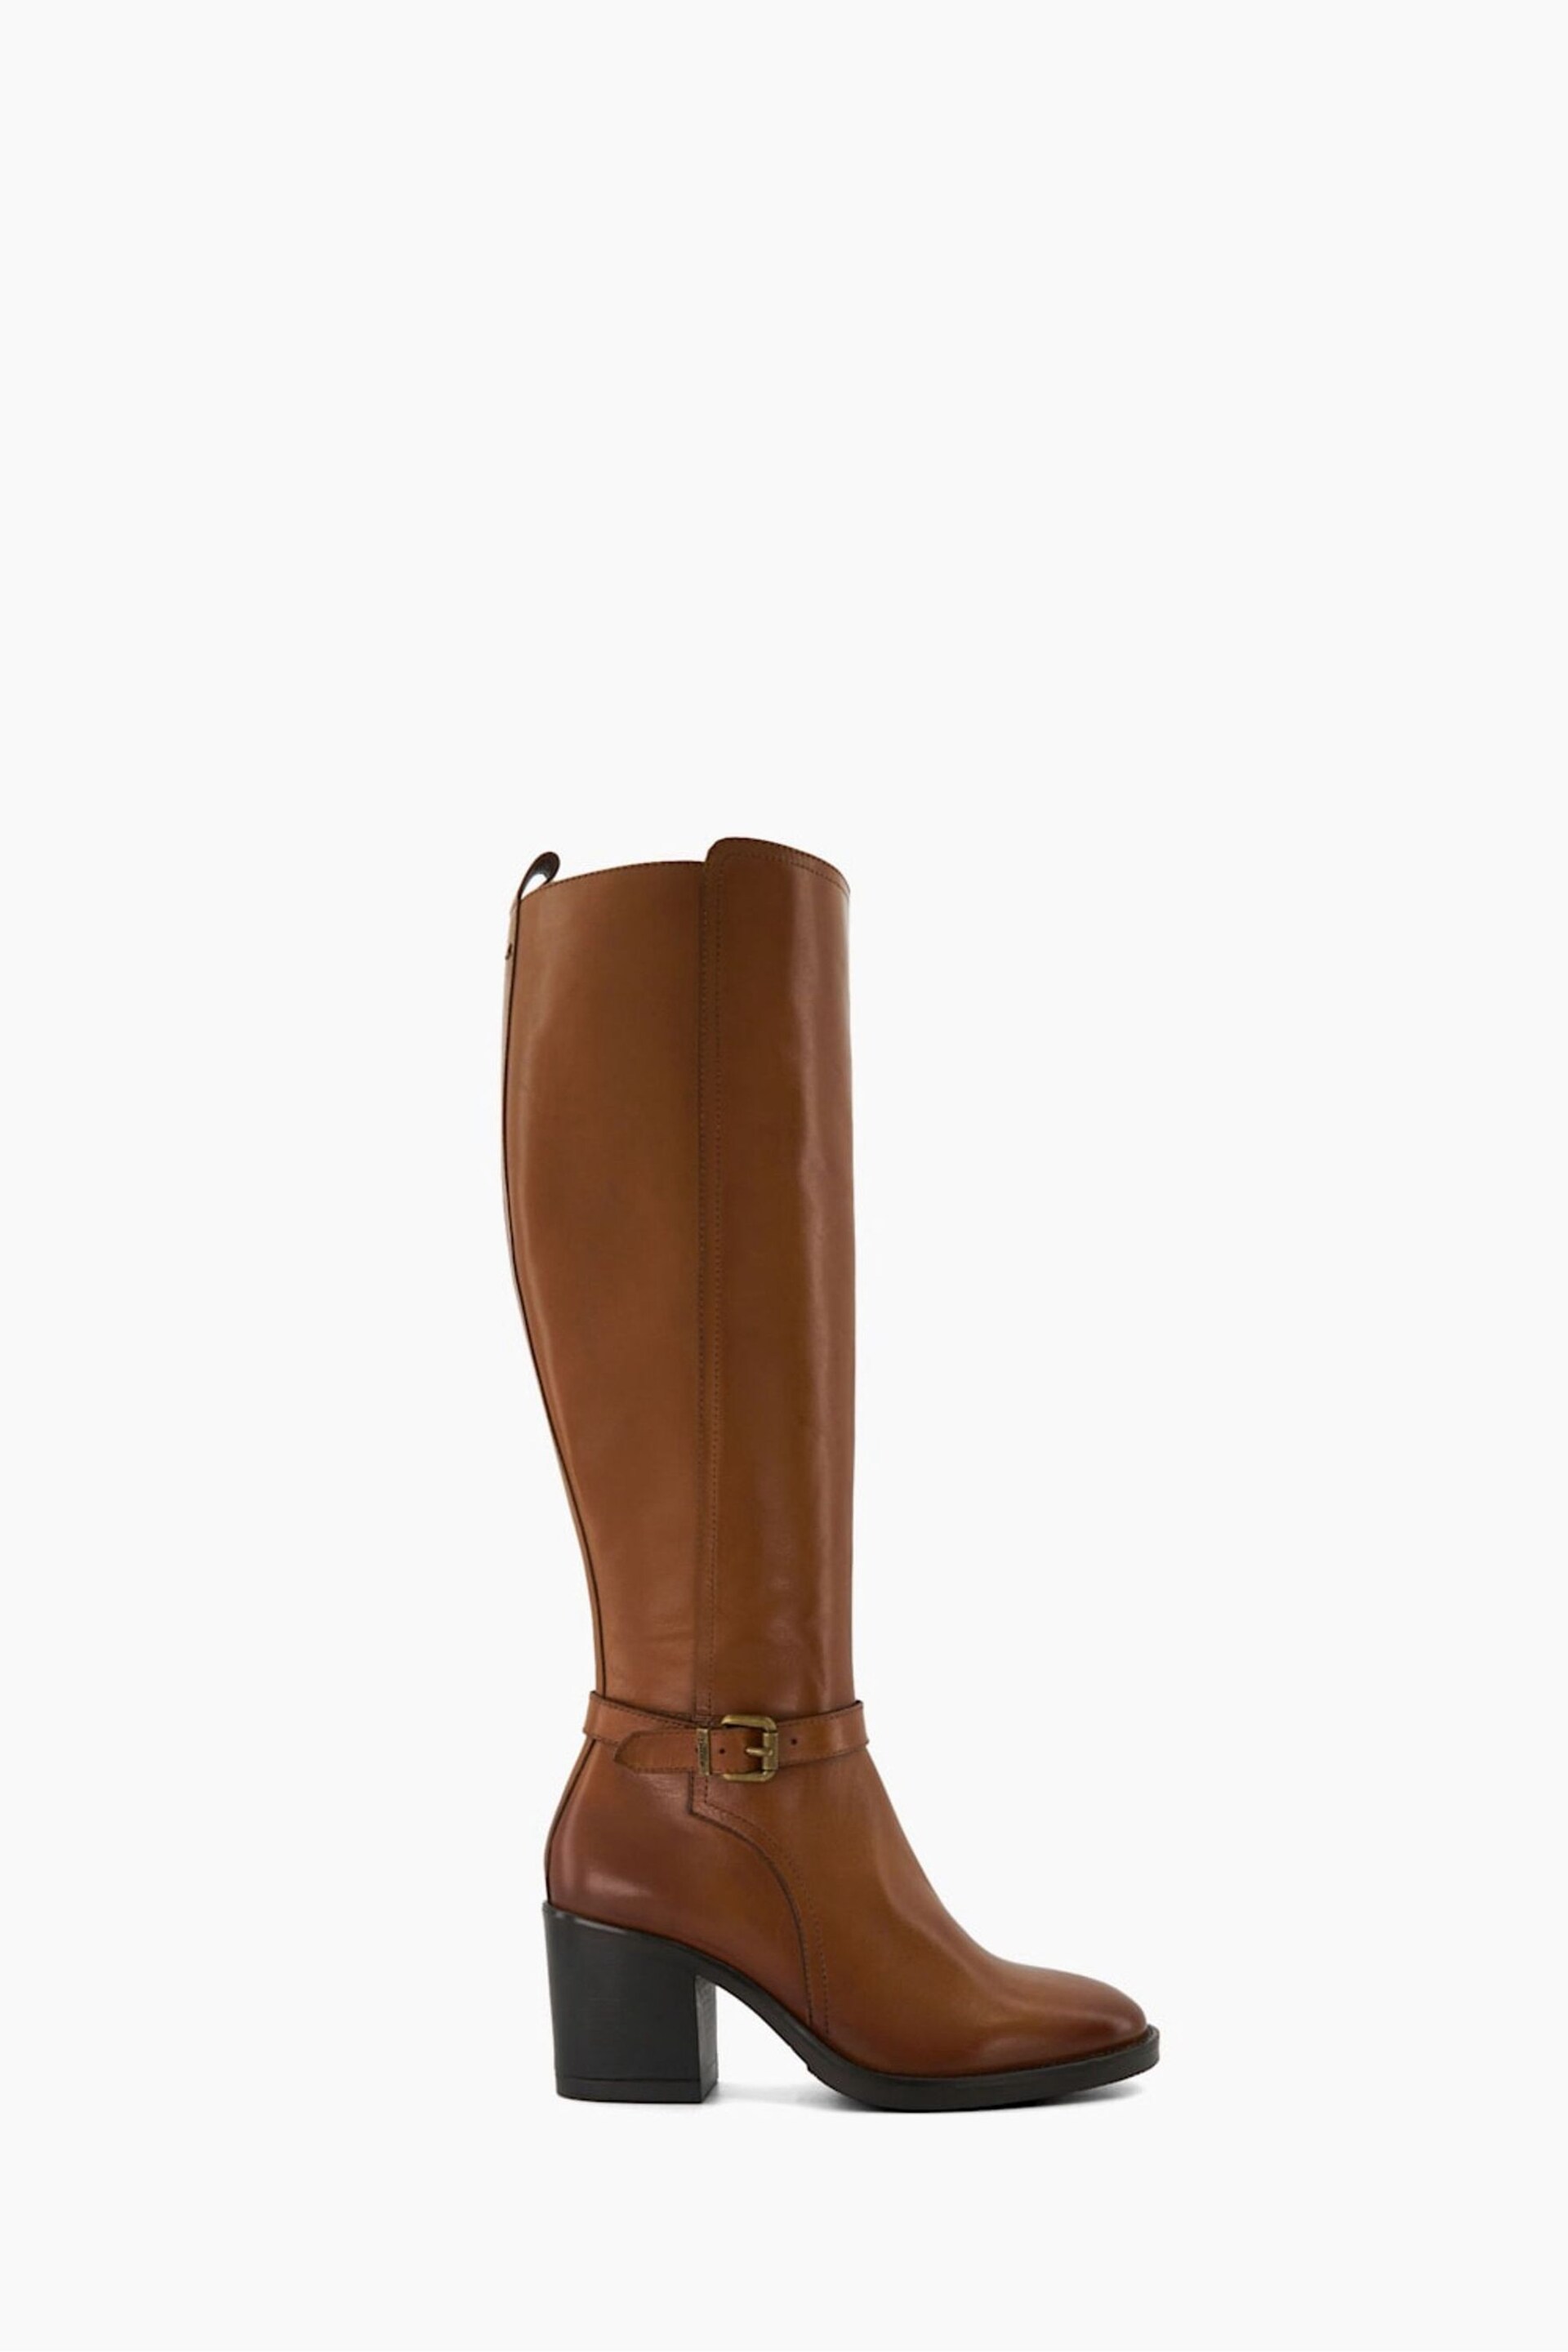 Dune London Natural Trance Buckle Heeled Knee High Boots - Image 1 of 6